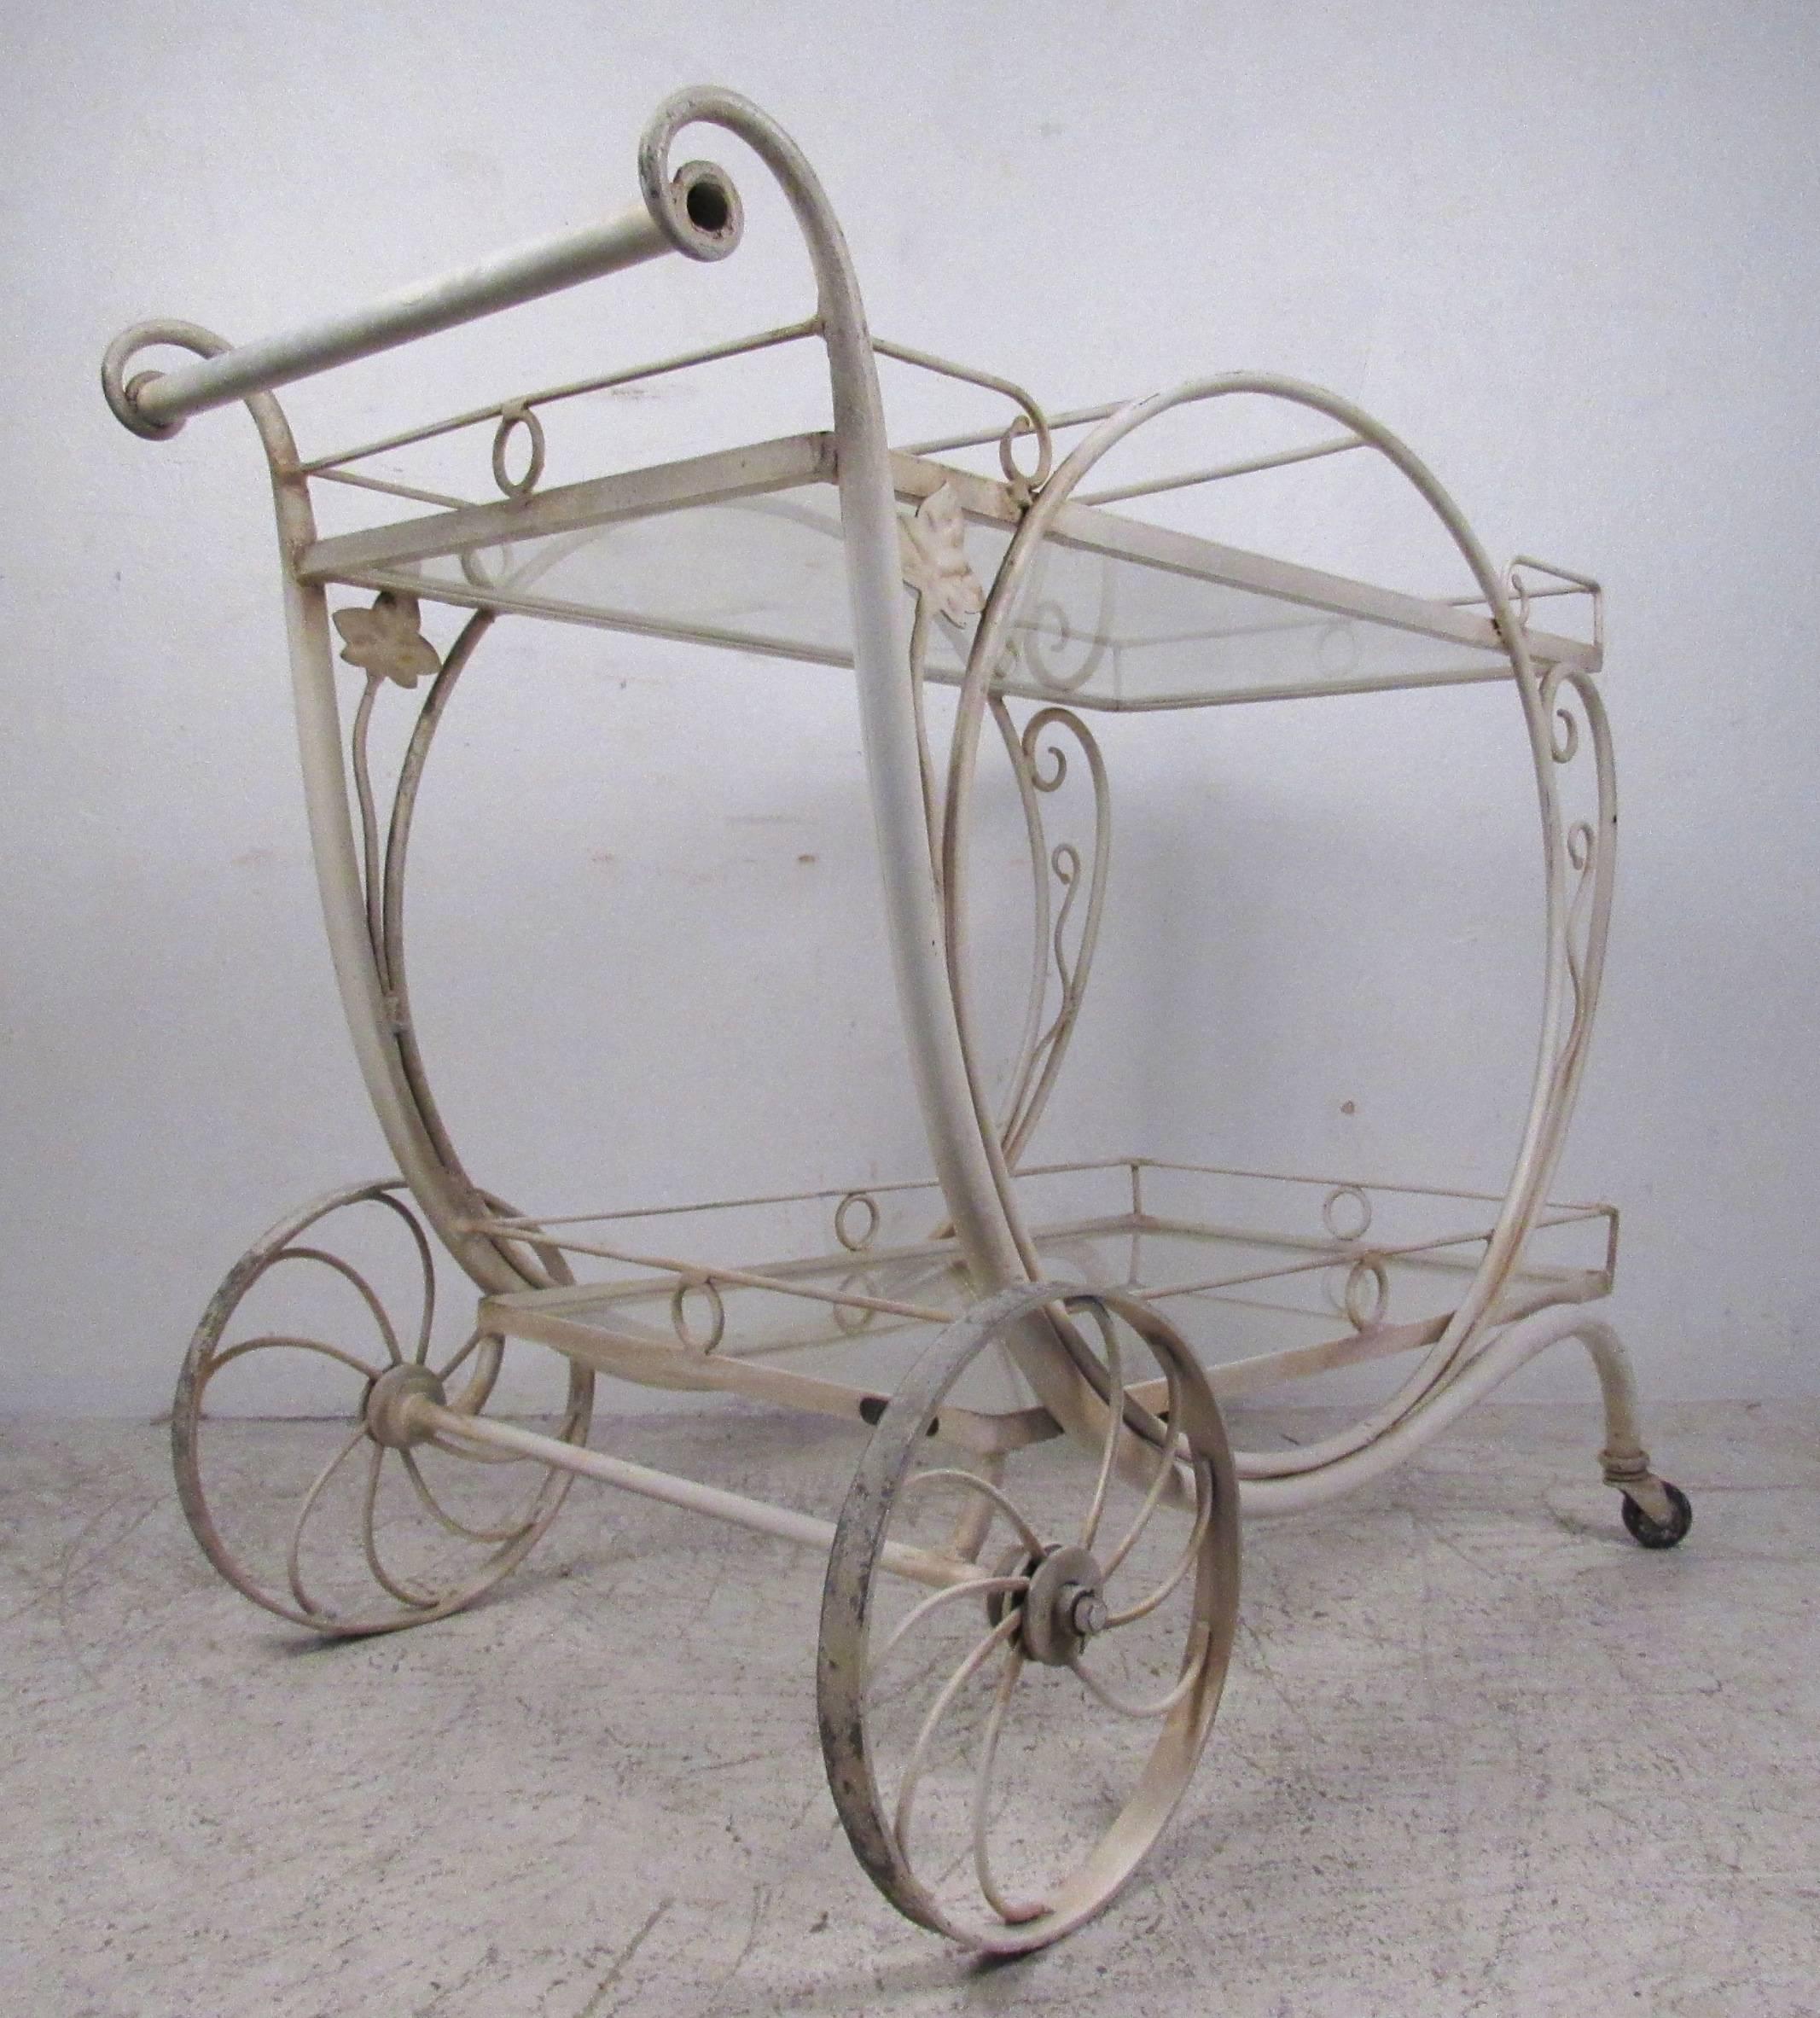 Wrought iron two-tier serving cart by John Salterini. Please confirm item location (NY or NJ) with dealer.